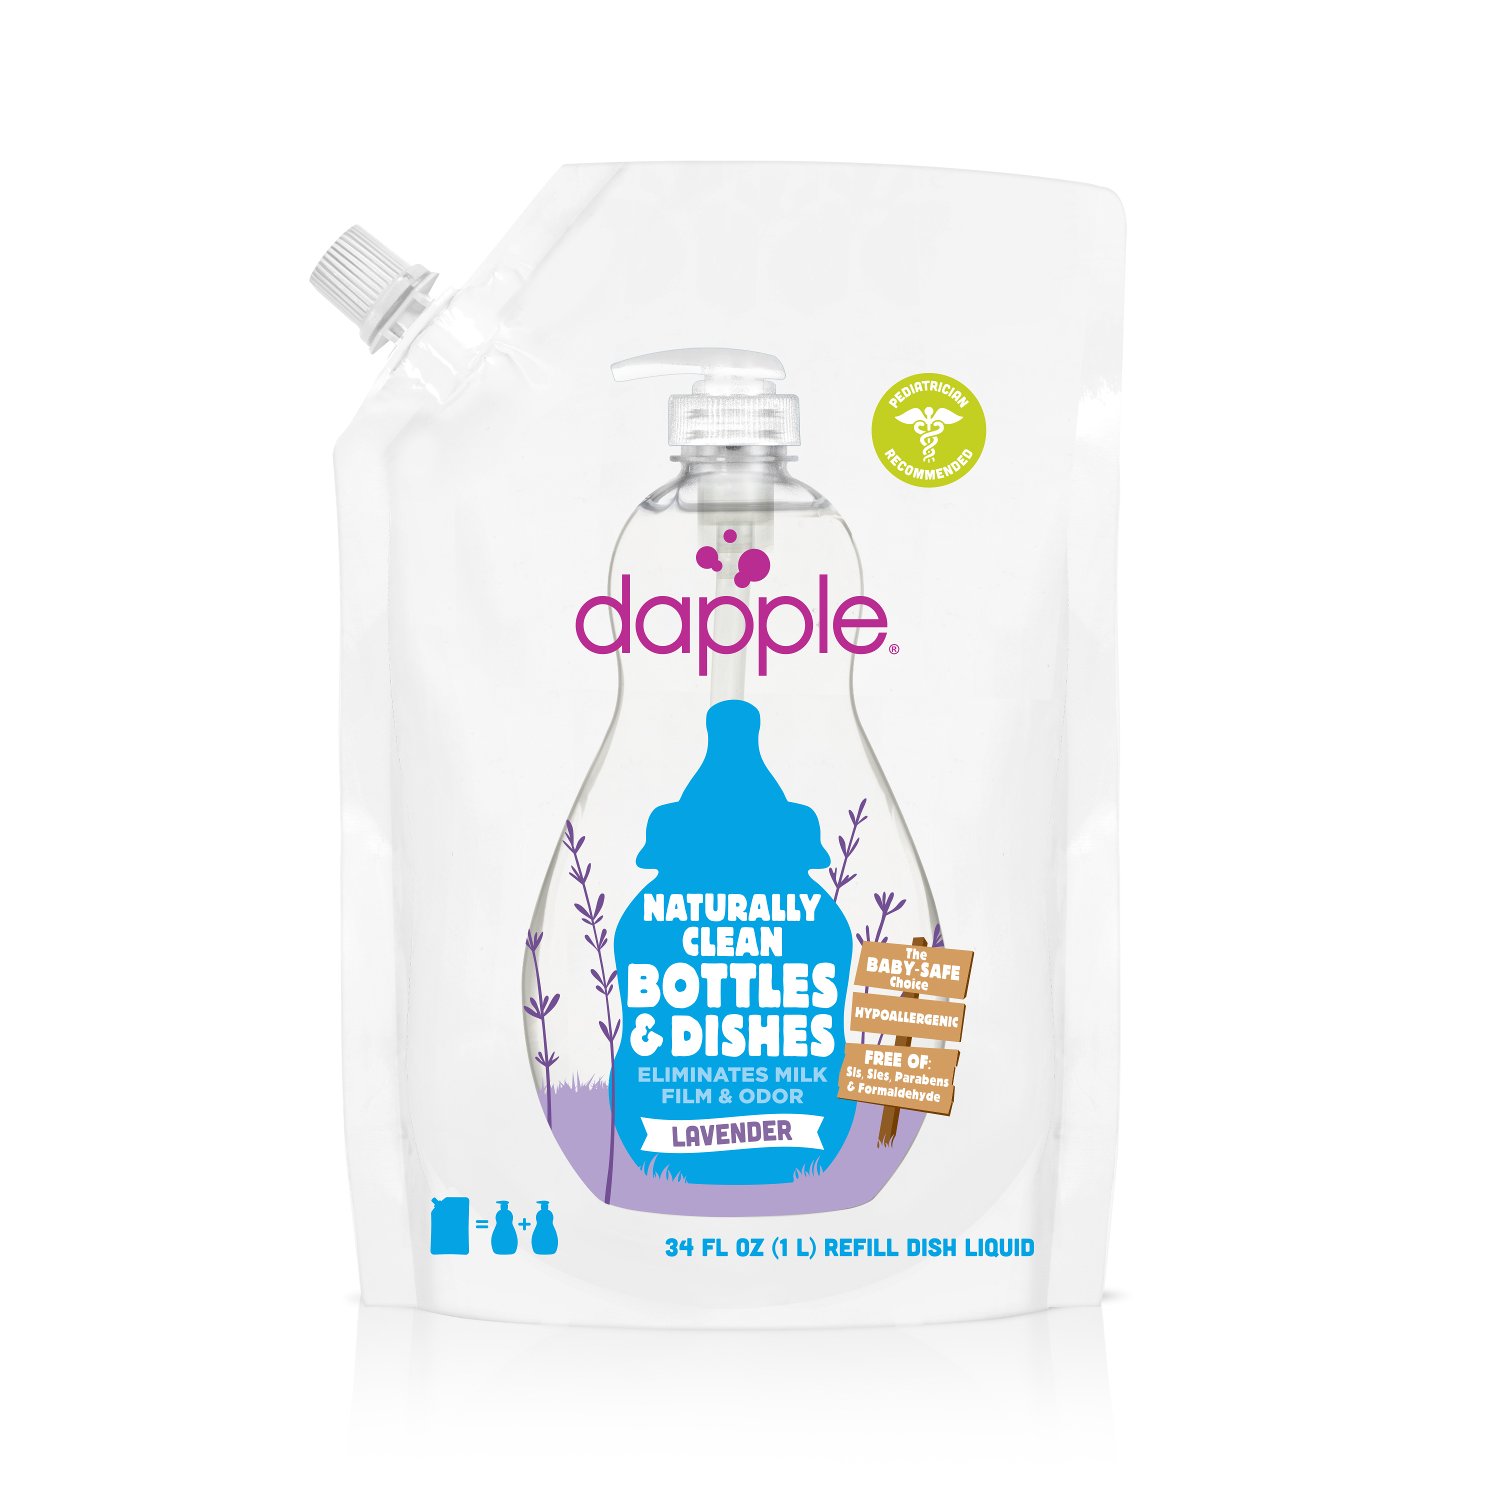 Quirks Marketing Philippines - Dapple - Naturally Clean Bottles & Dishes Refill Pack